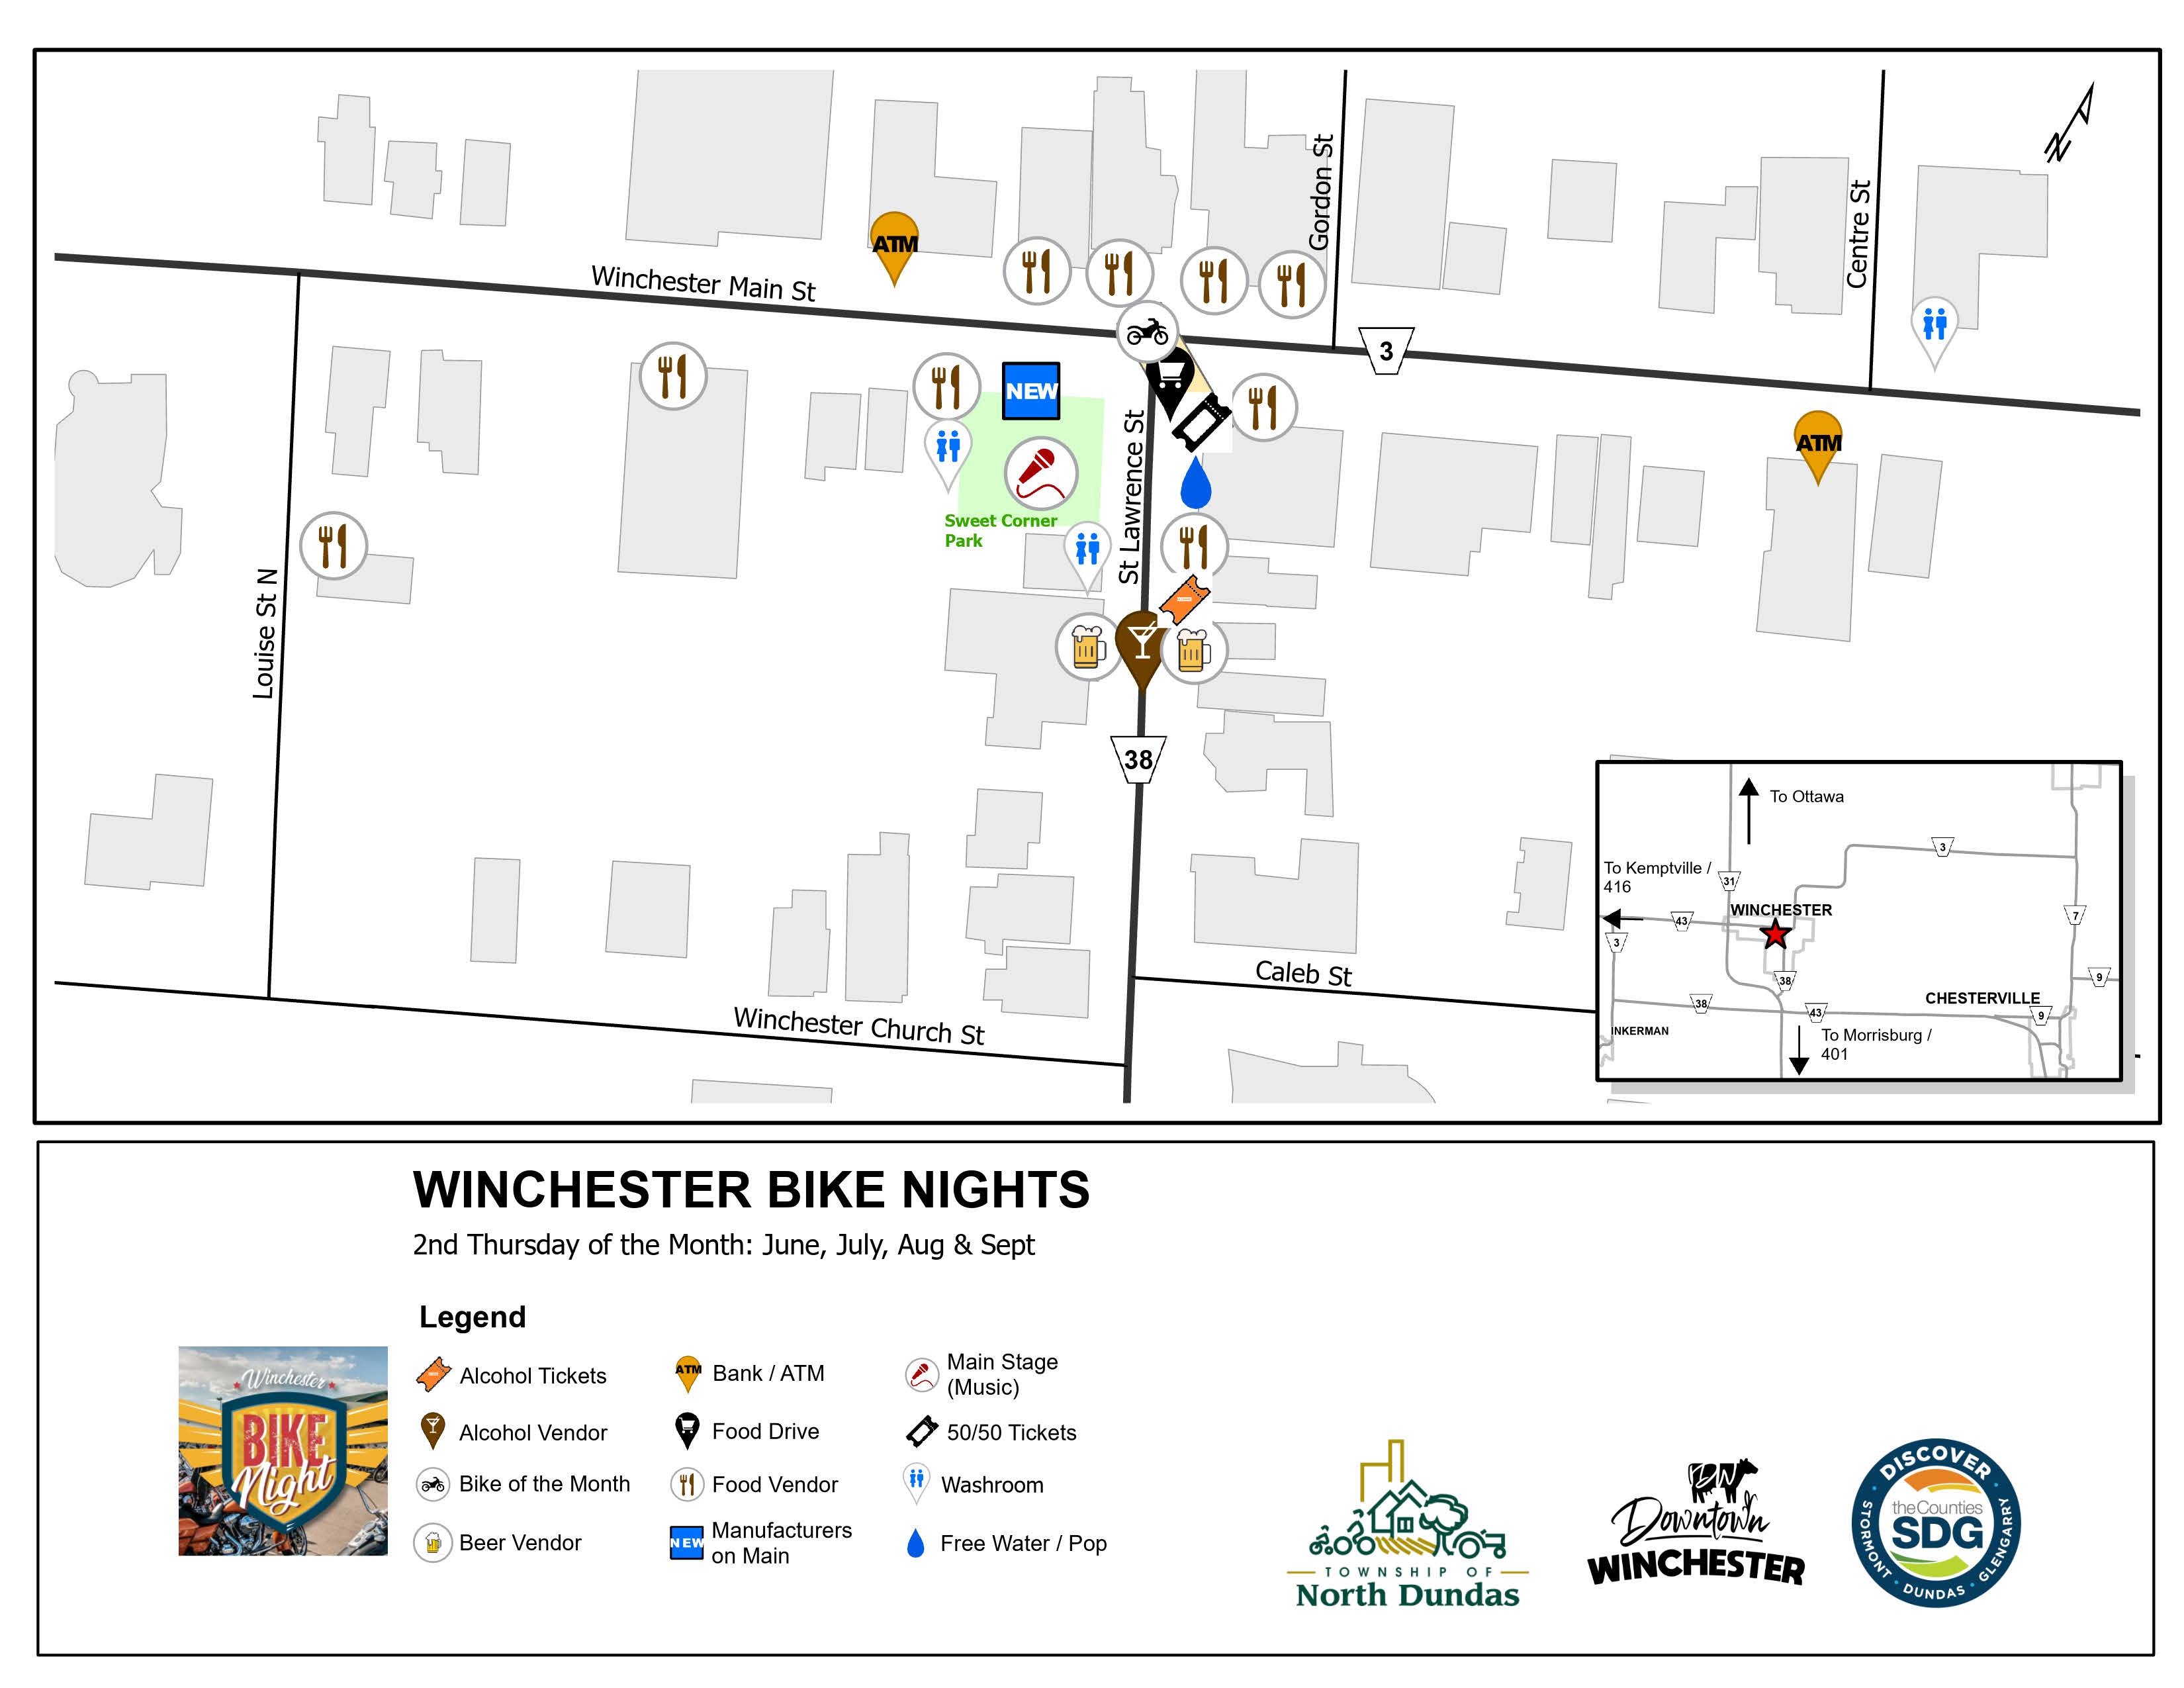 Winchester Bike Nights Map of vendor locations